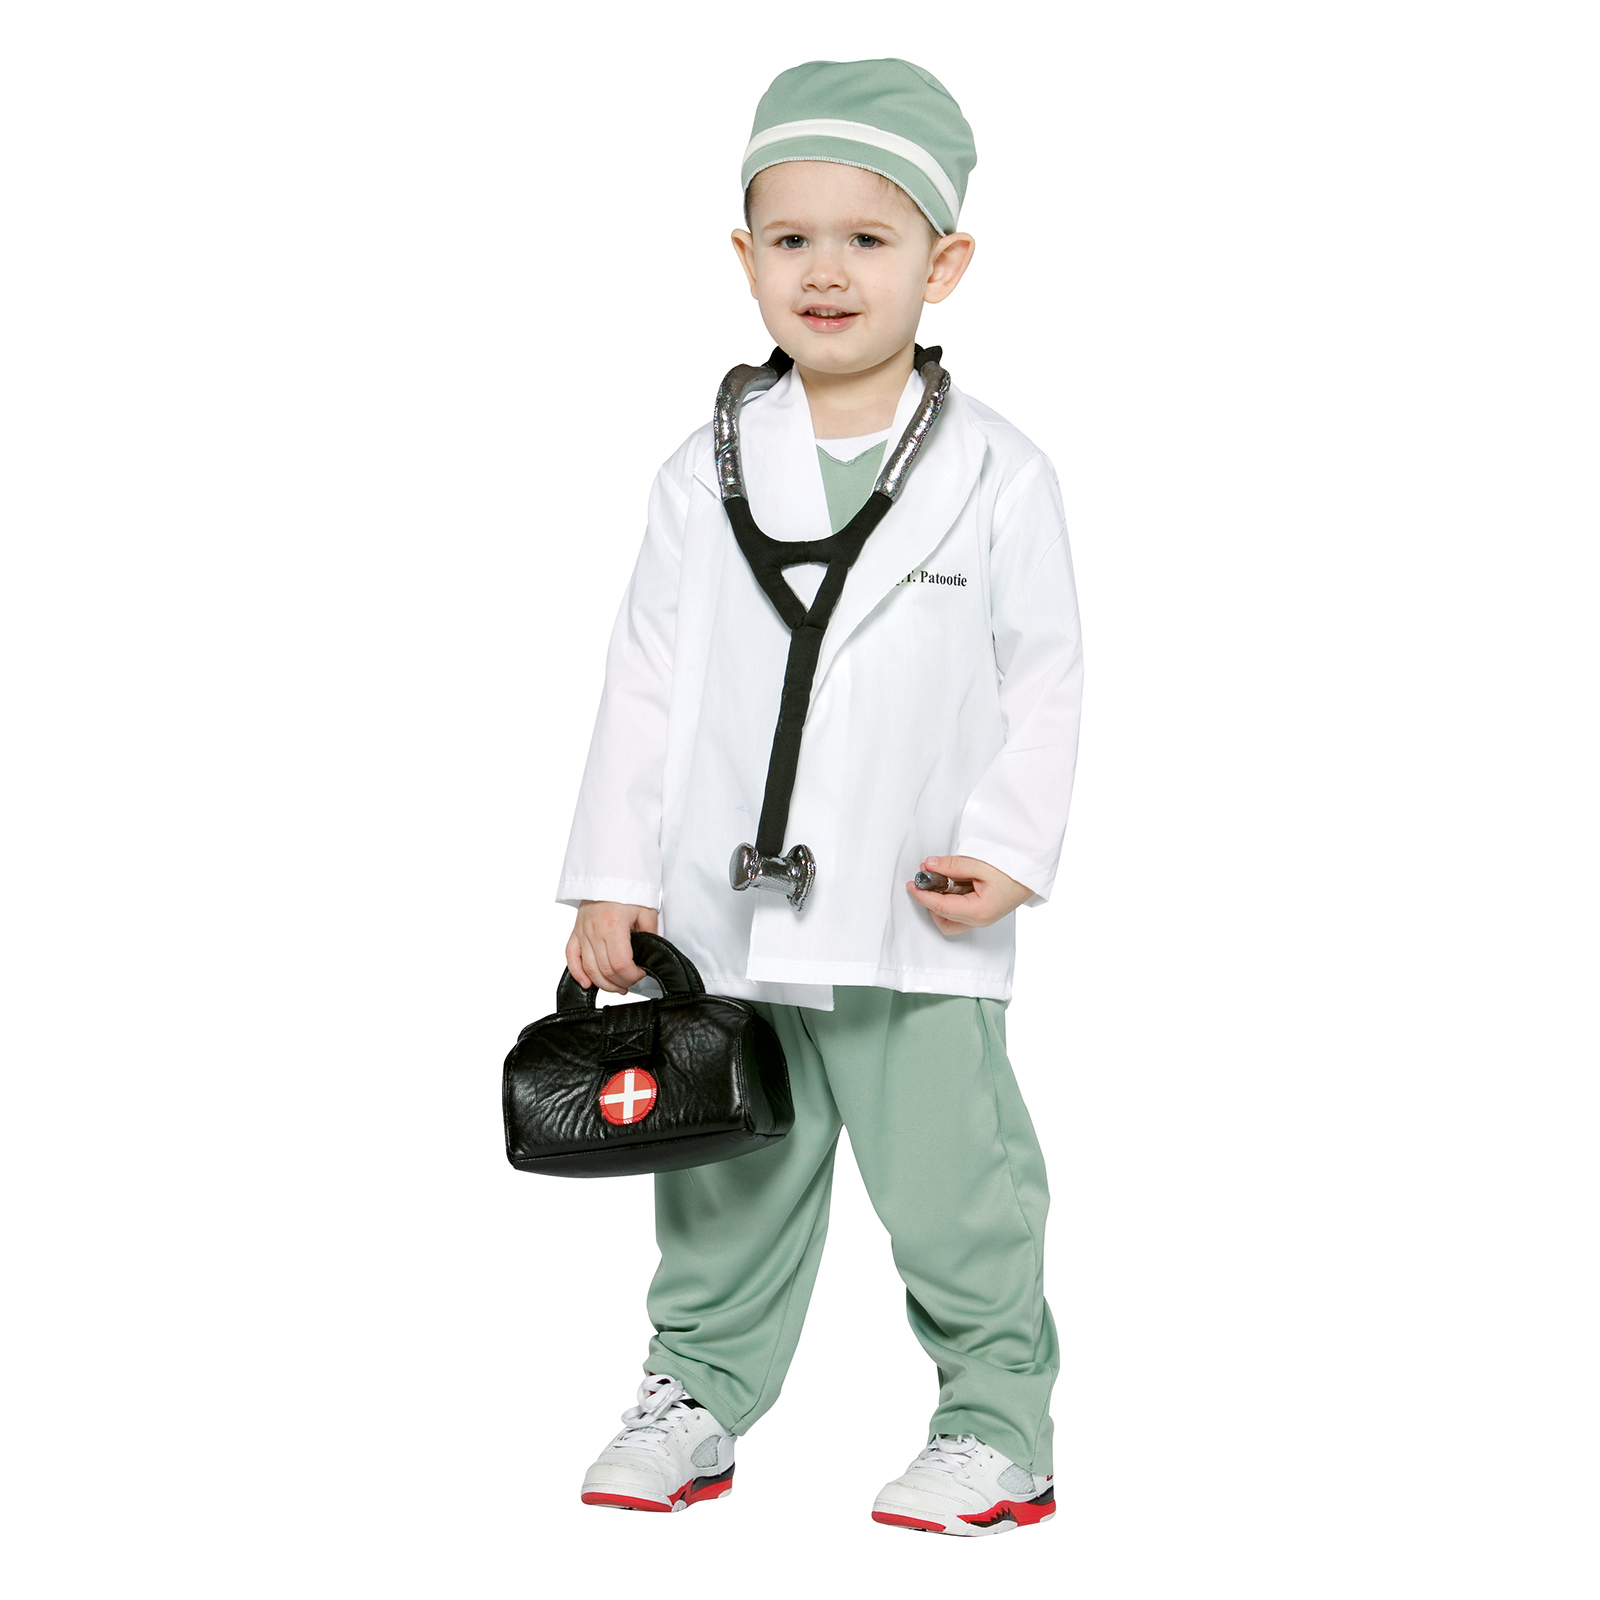 Future Doctor 3-4T Size: 3T